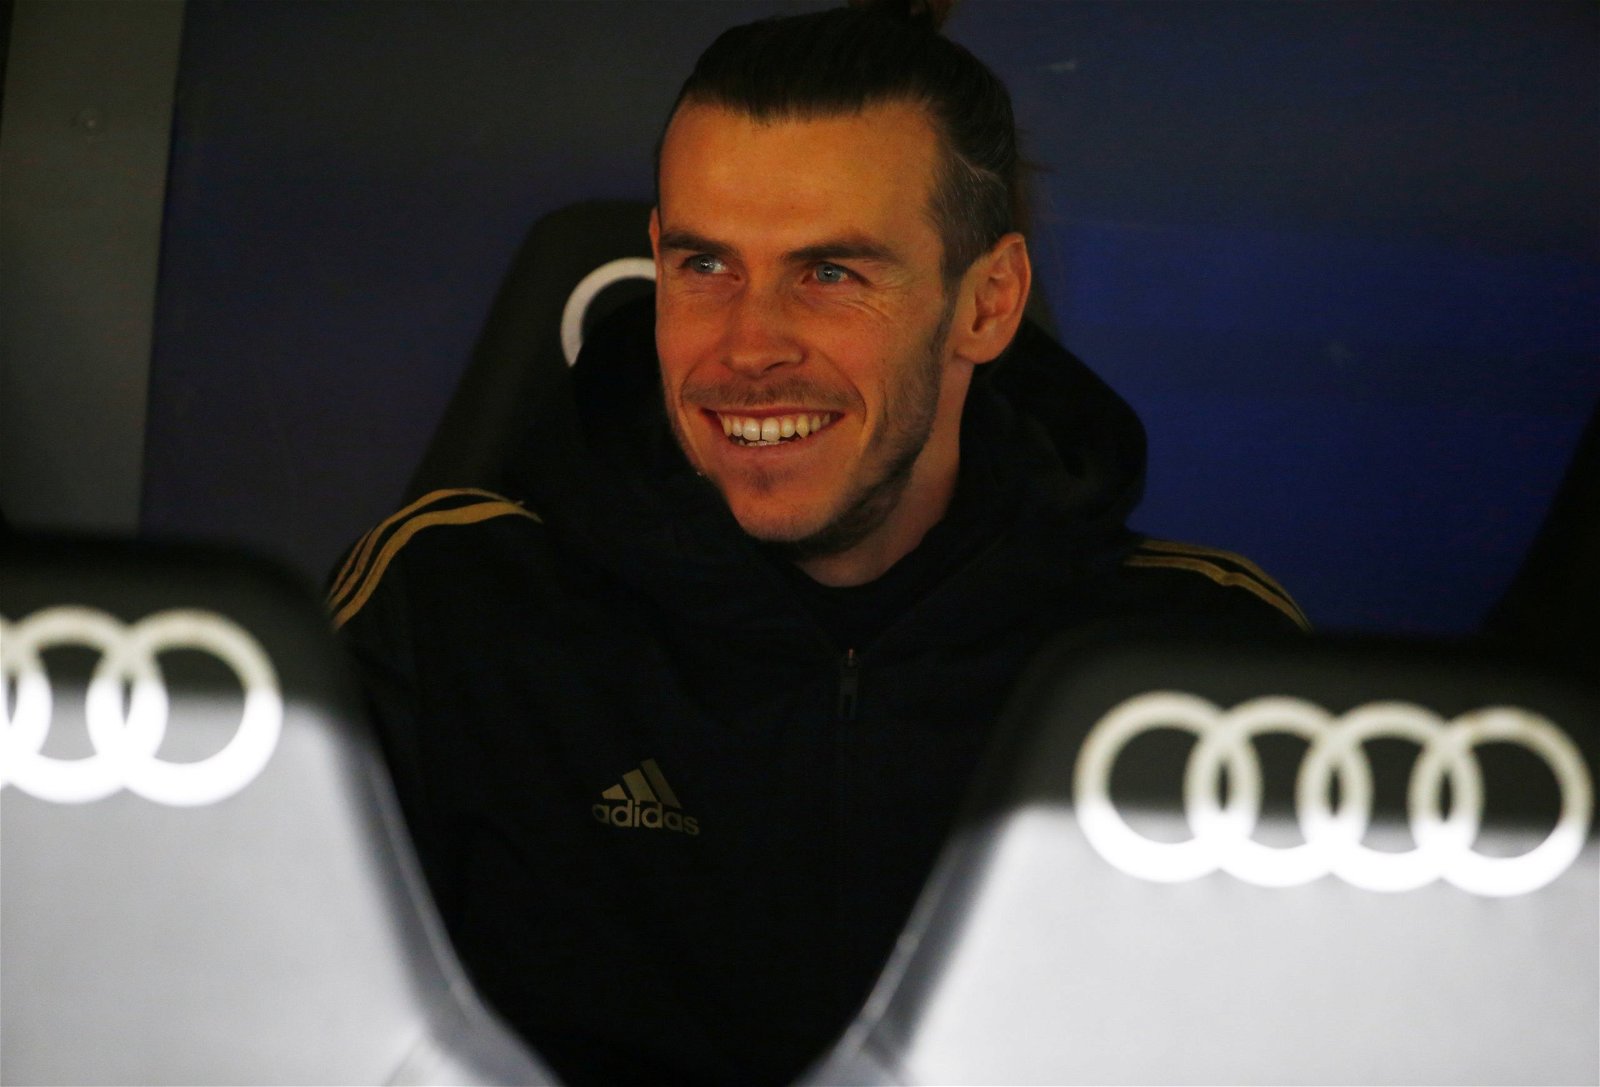 Bale's agent hits out at 'experts' and their 'opinions'